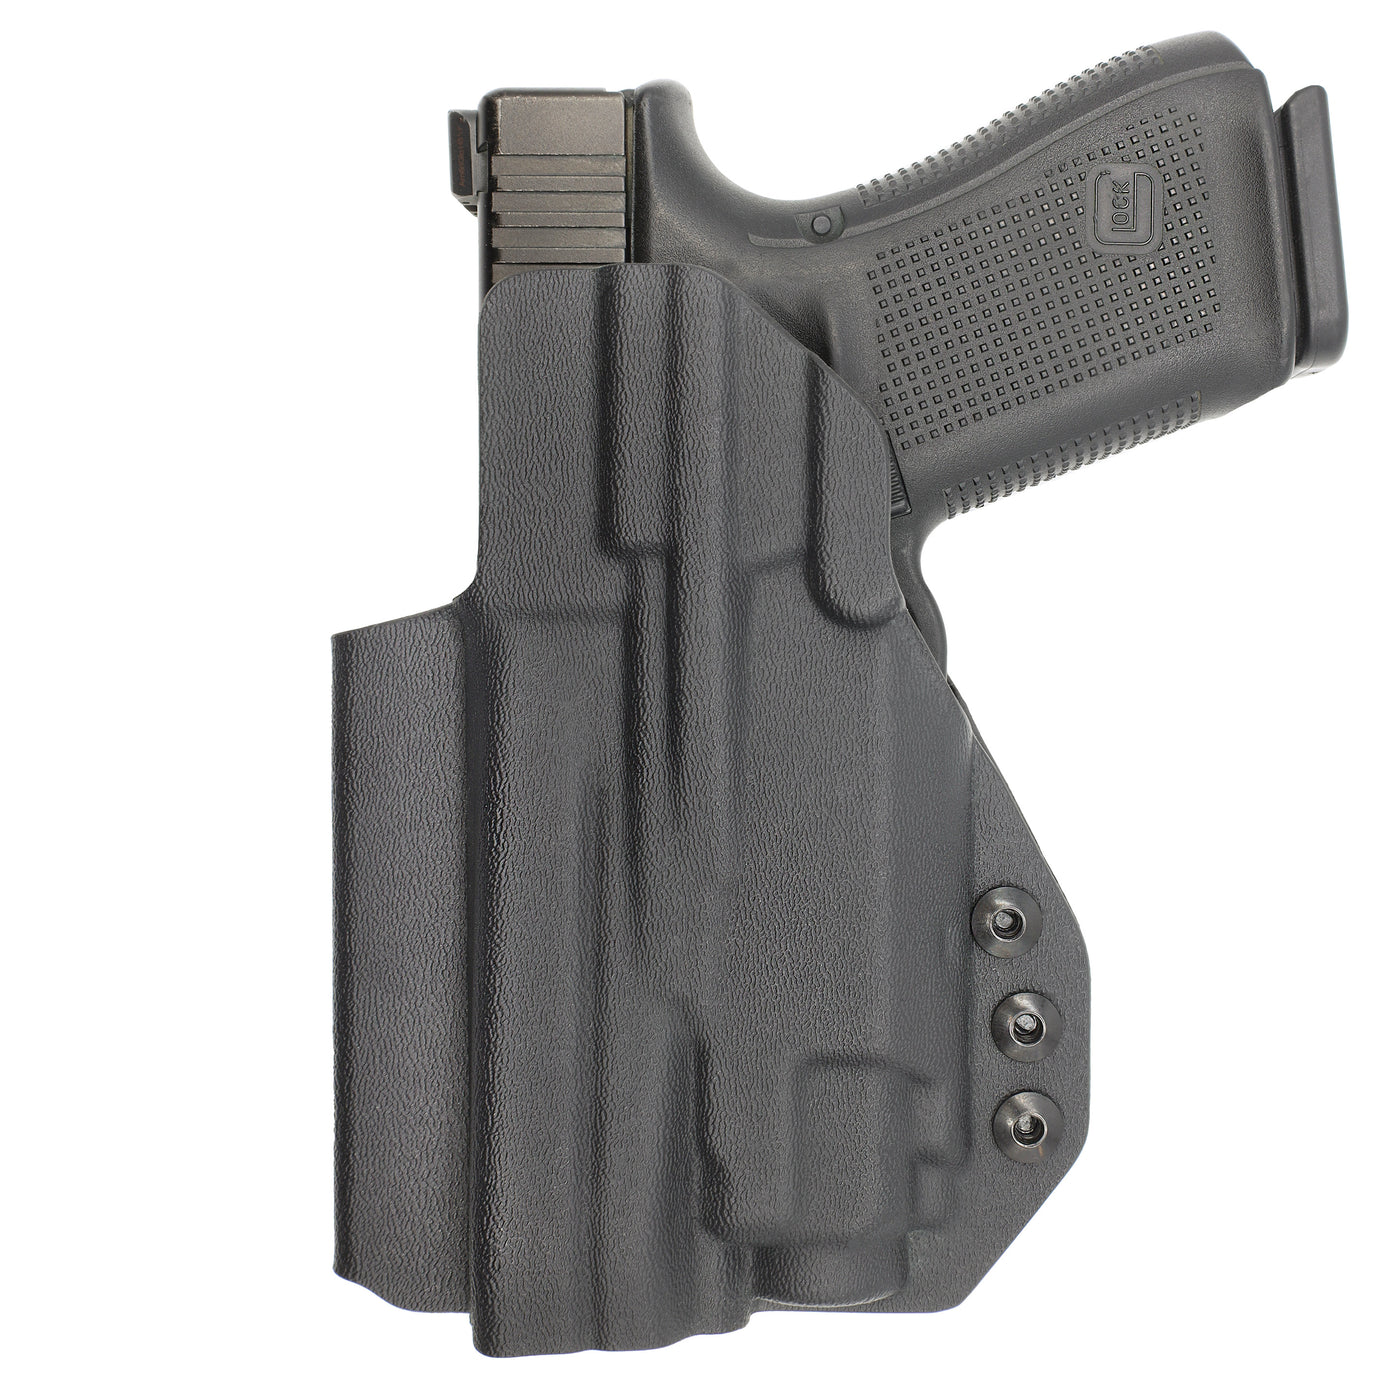 C&G Holsters custom IWB tactical CZ P10/c streamlight TLR8 holstered back view